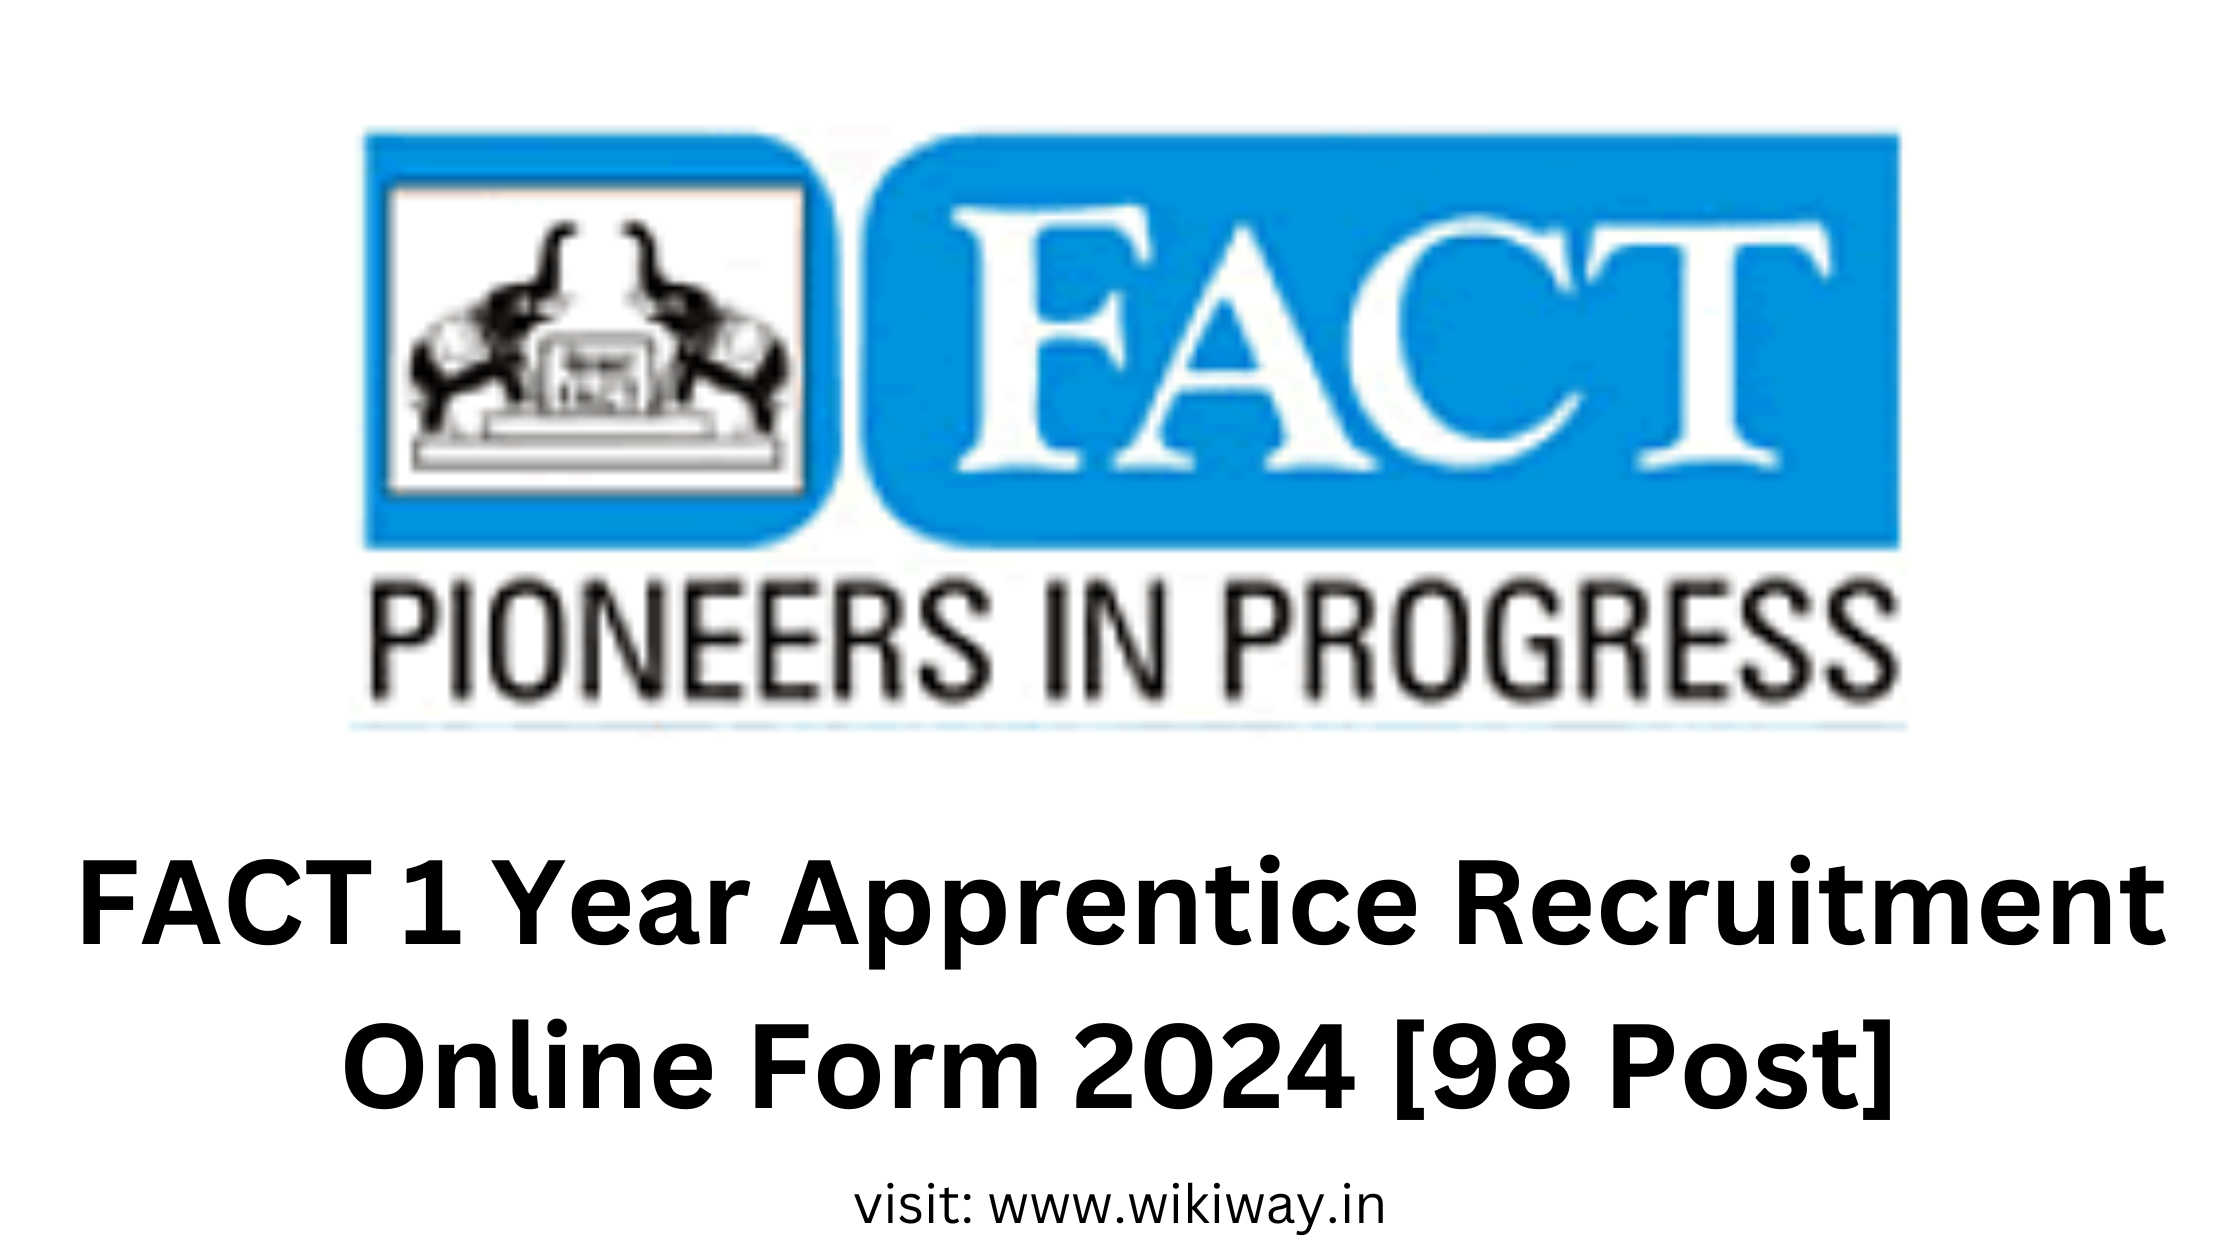 FACT 1 Year Apprentice Recruitment Online Form 2024